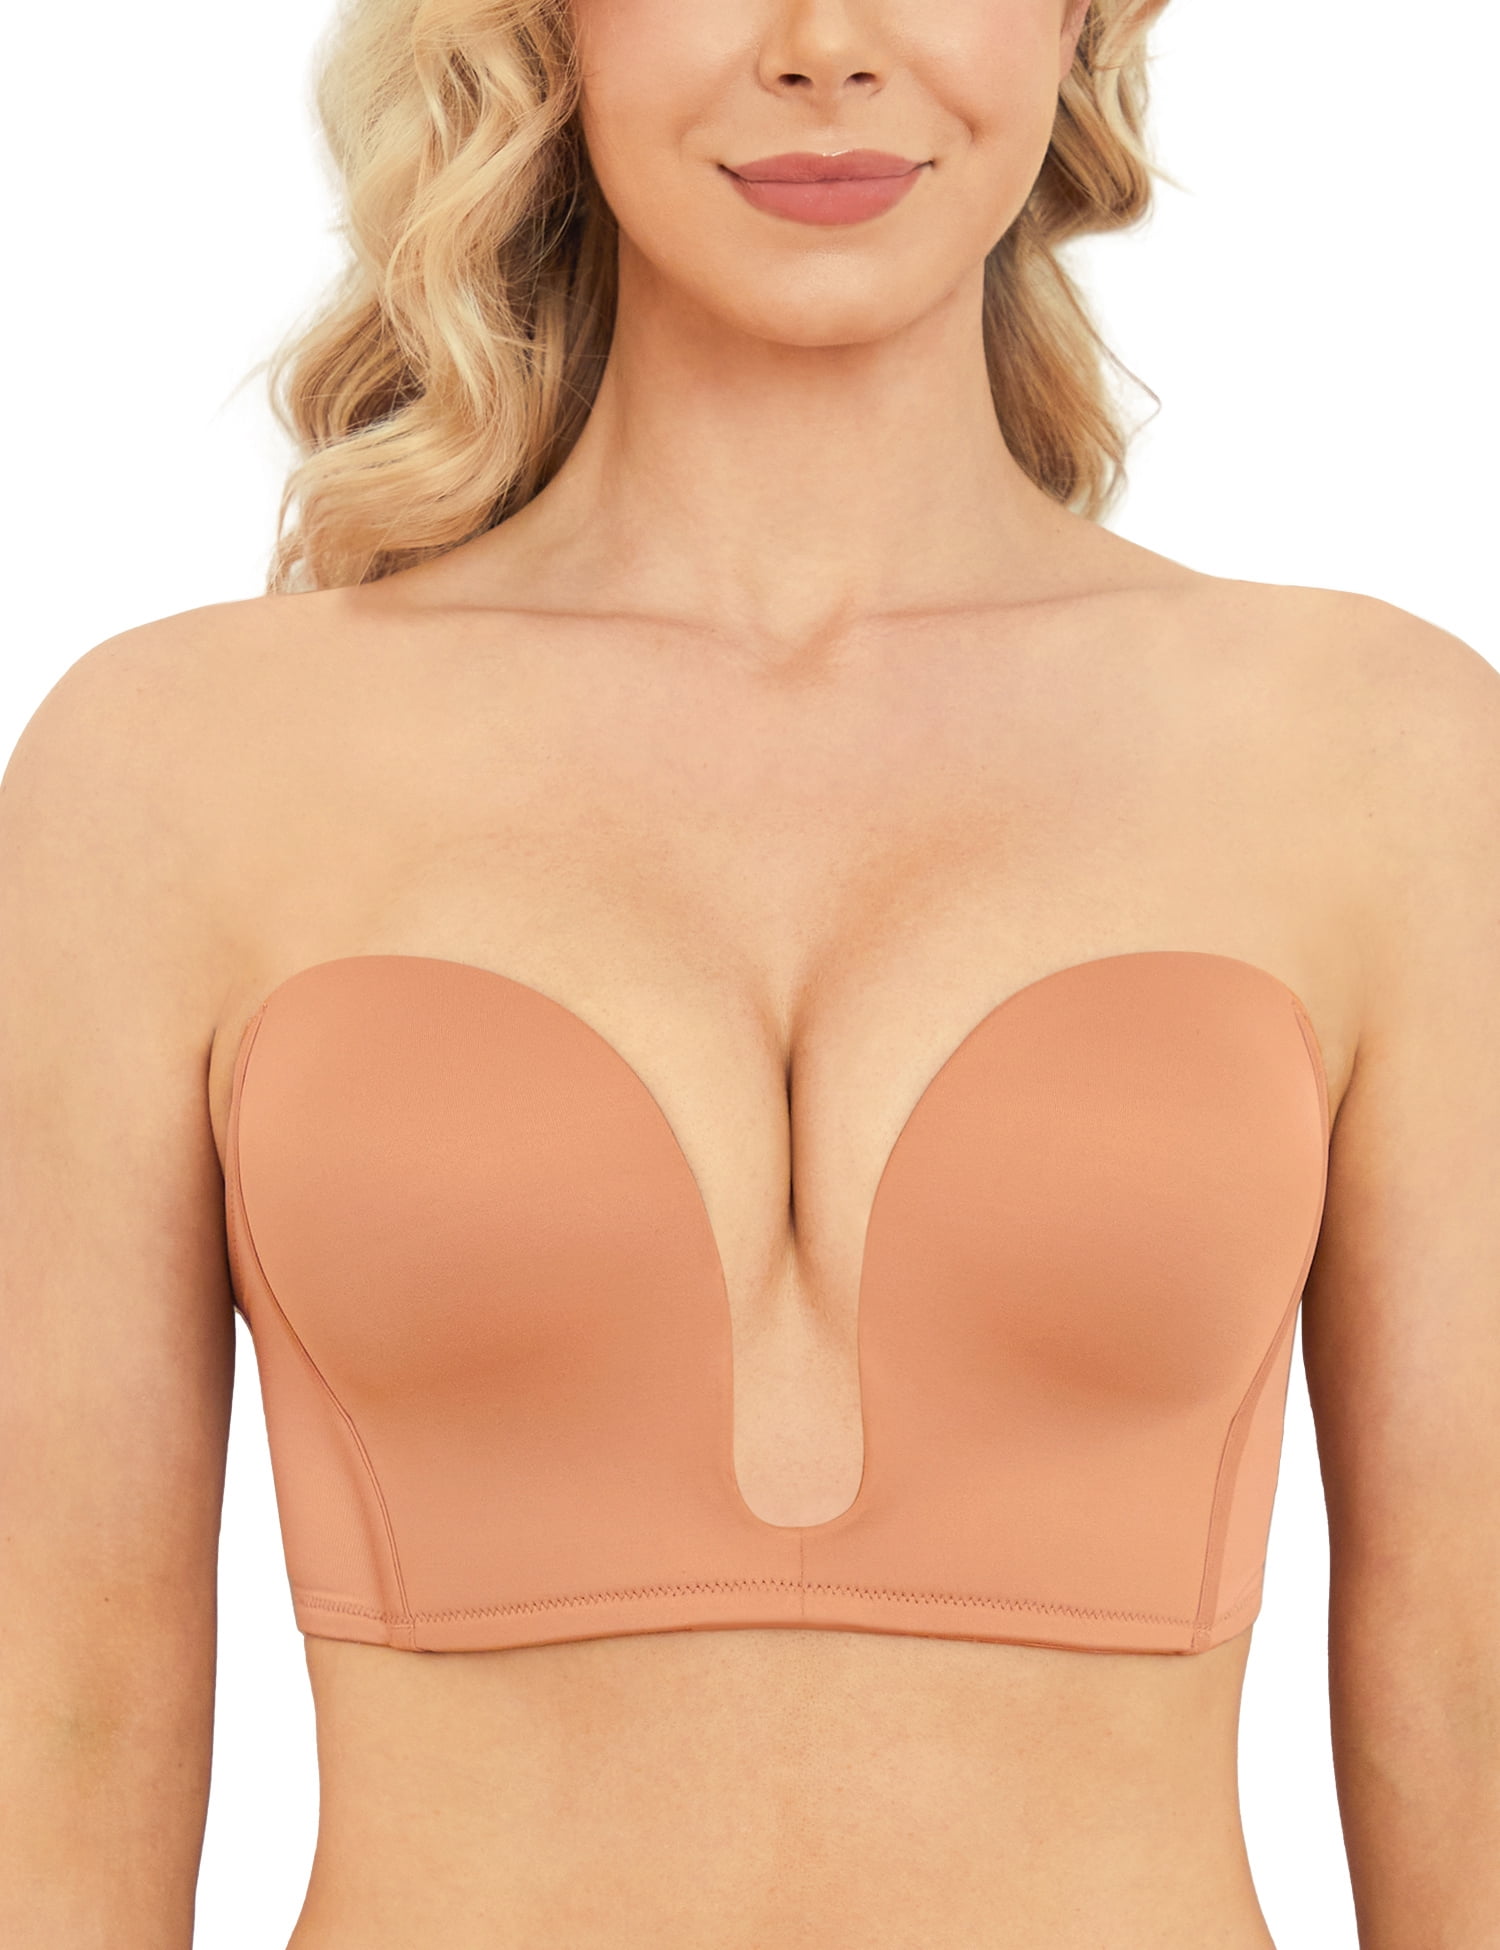 Wingslove Strapless Bra for Women Underwired Push Up Full Figure Bra  Multiway Carpet 8-Way Convertible Straps,Toffee White 38B 